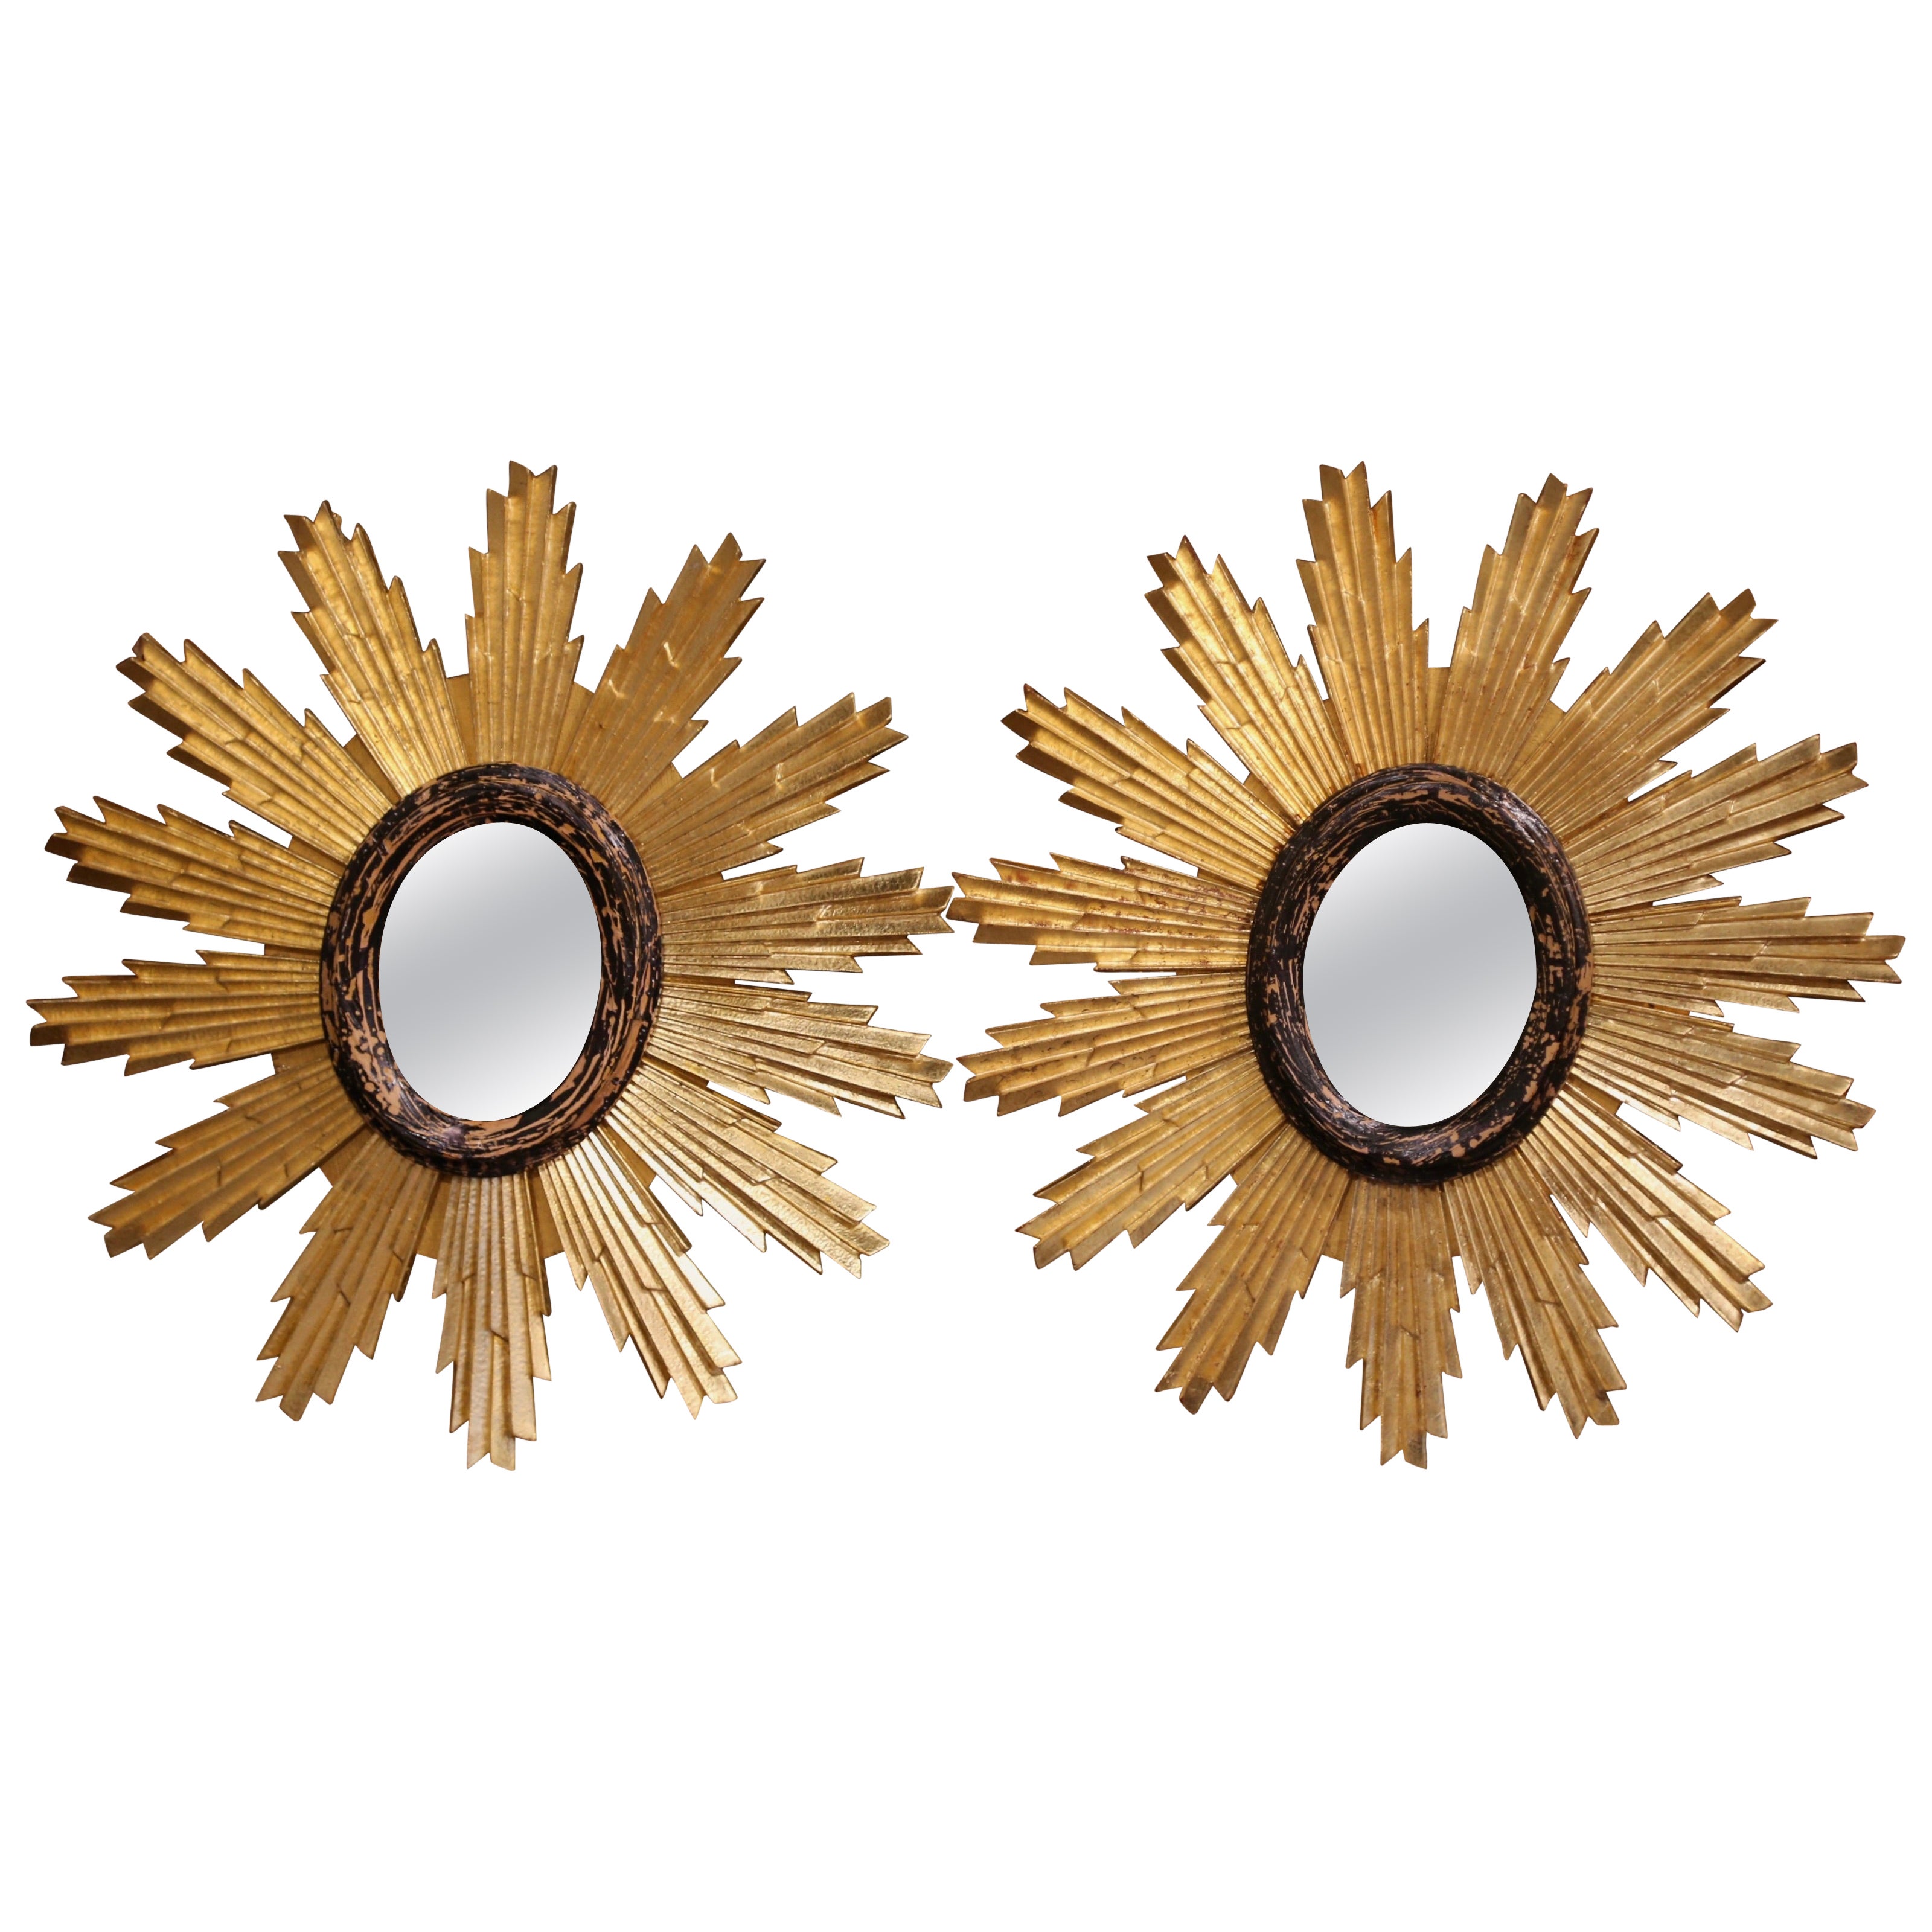 Pair of Italian Carved Two-Tone Giltwood and Blackened Wall Sunburst Mirrors For Sale